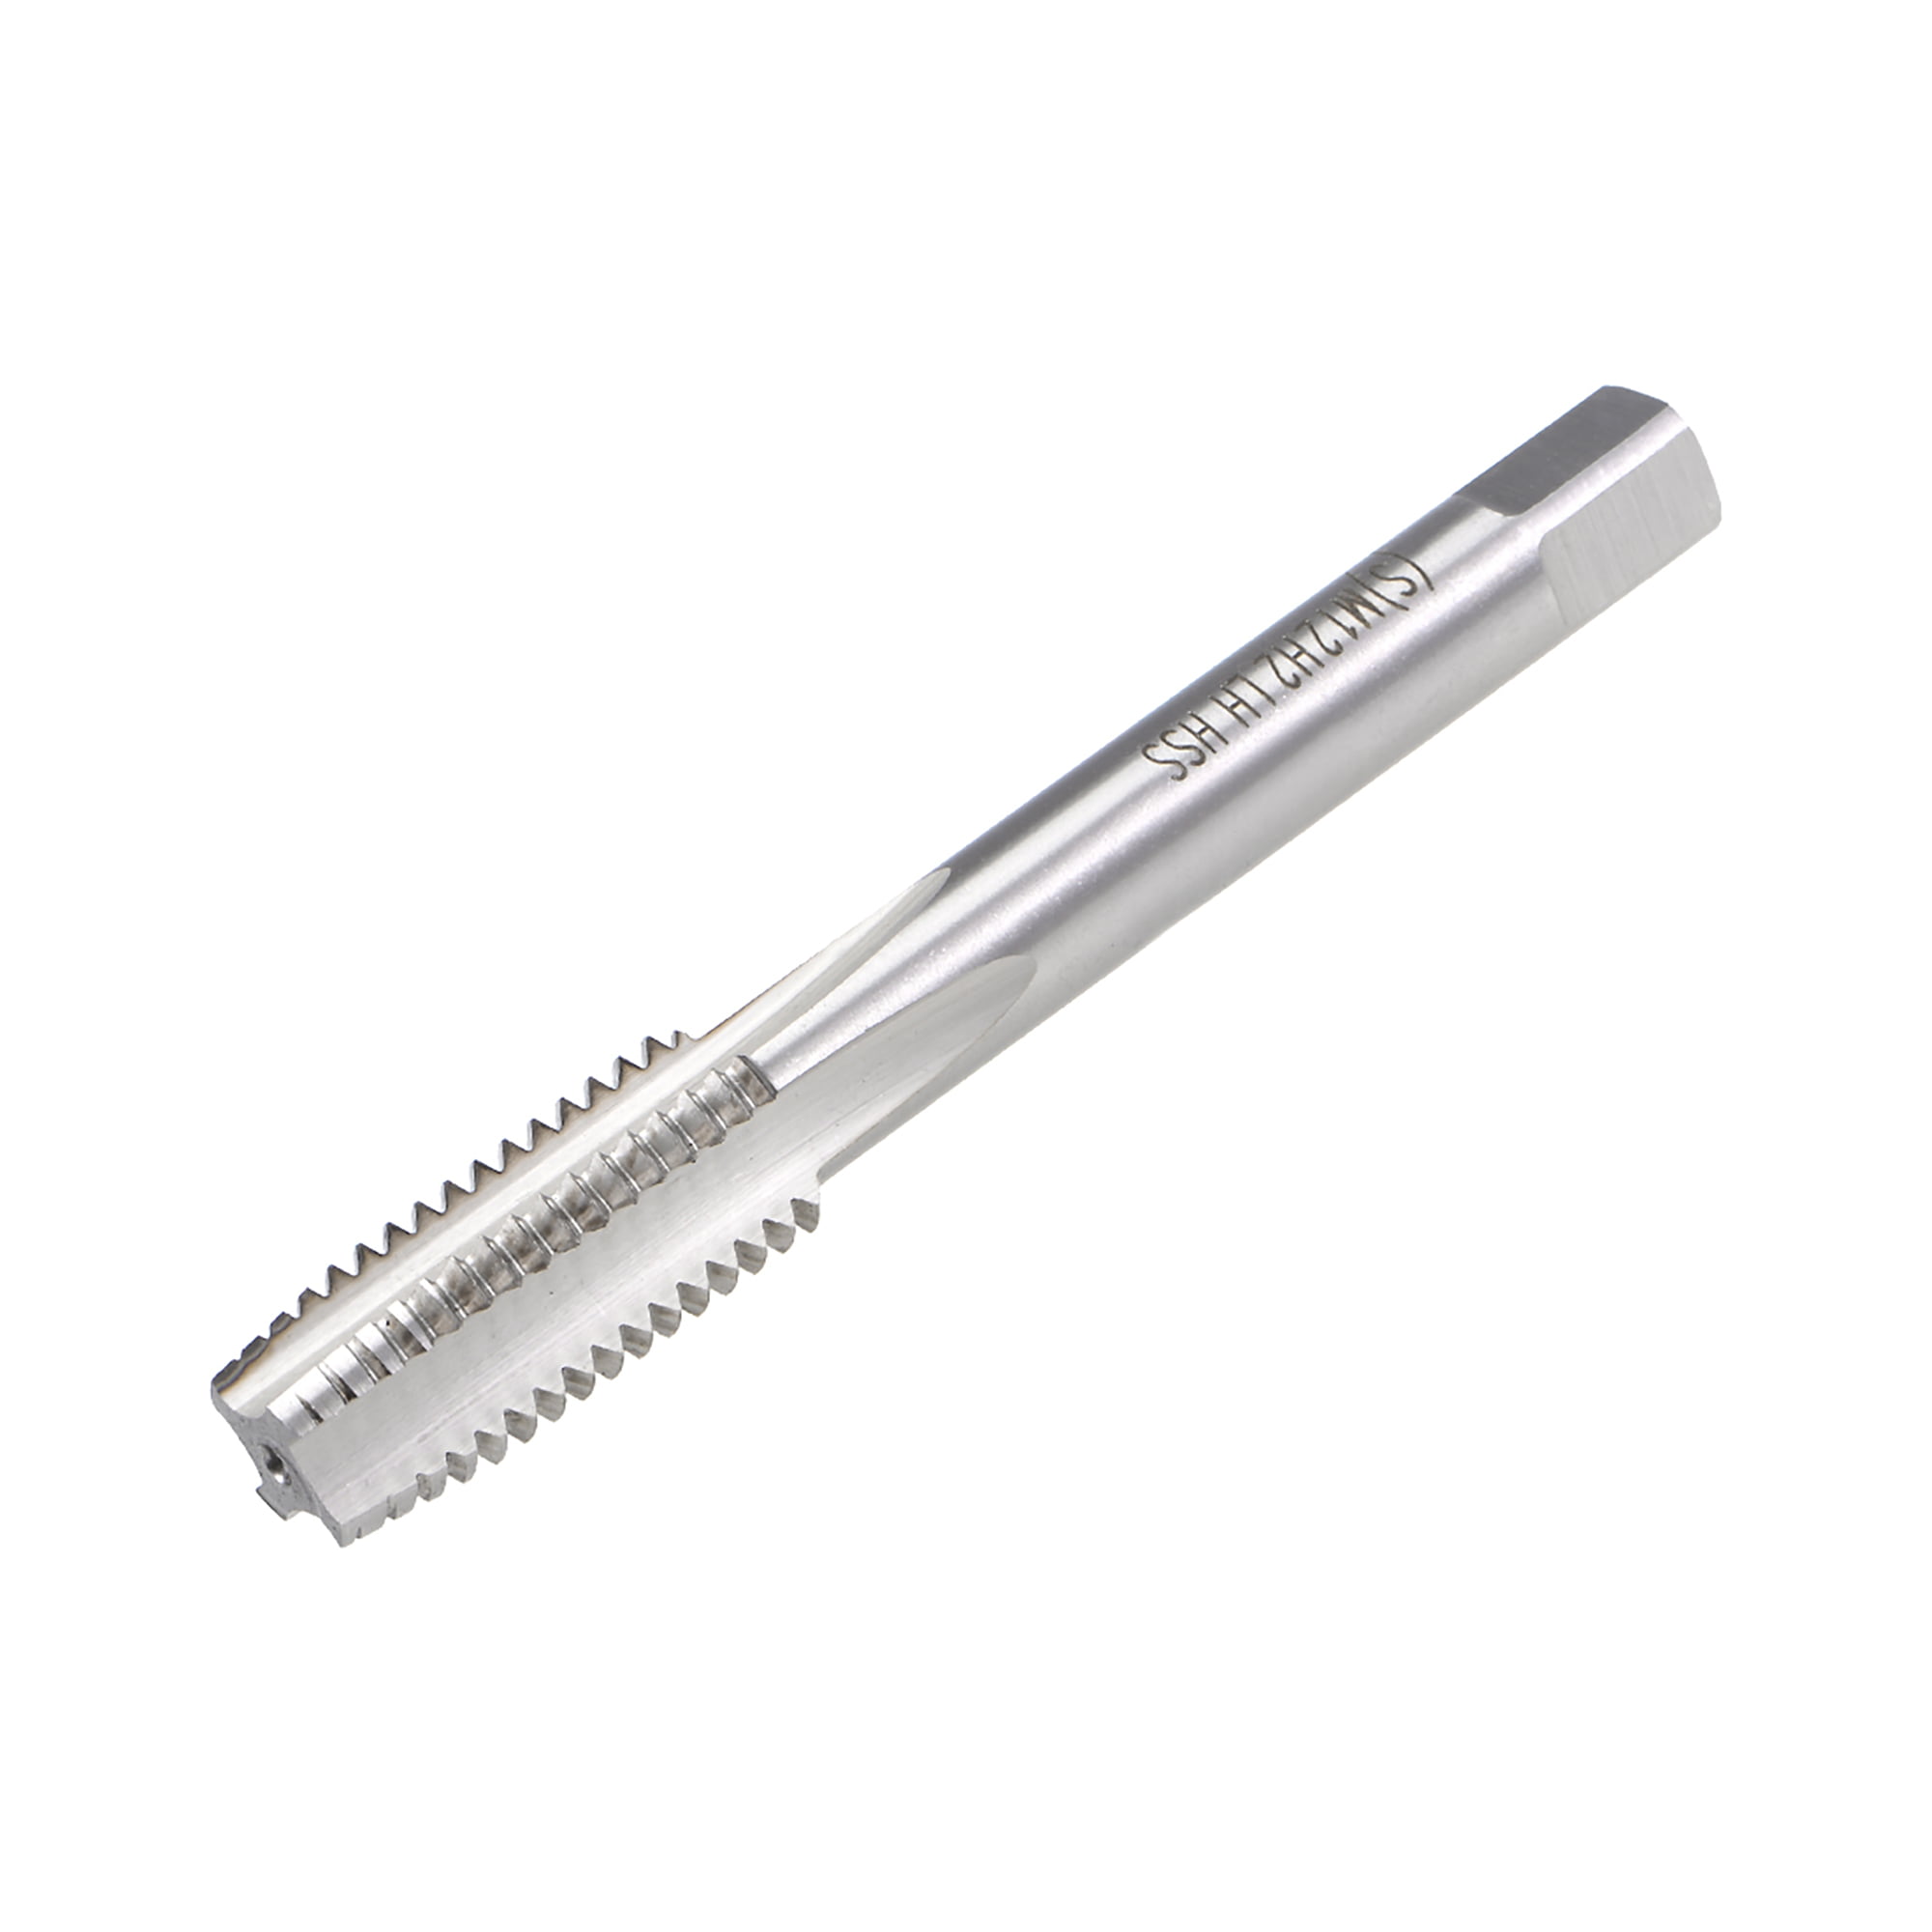 uxcell Metric Machine Tap Left M14 Thread 2 Pitch H2 4 Flutes High Speed Steel 